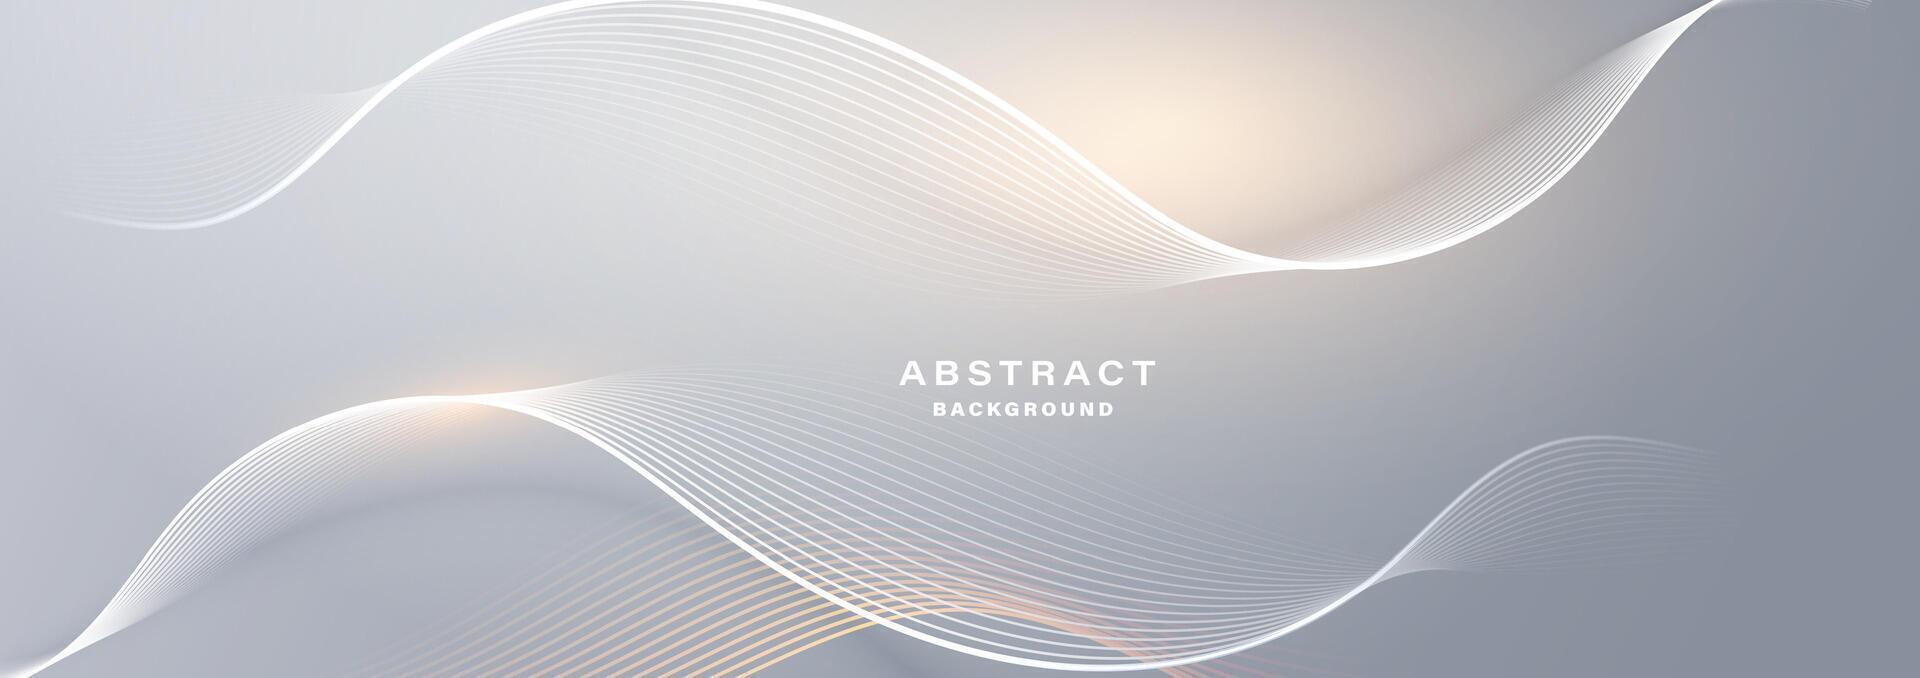 Modern abstract background with flowing particles. vector